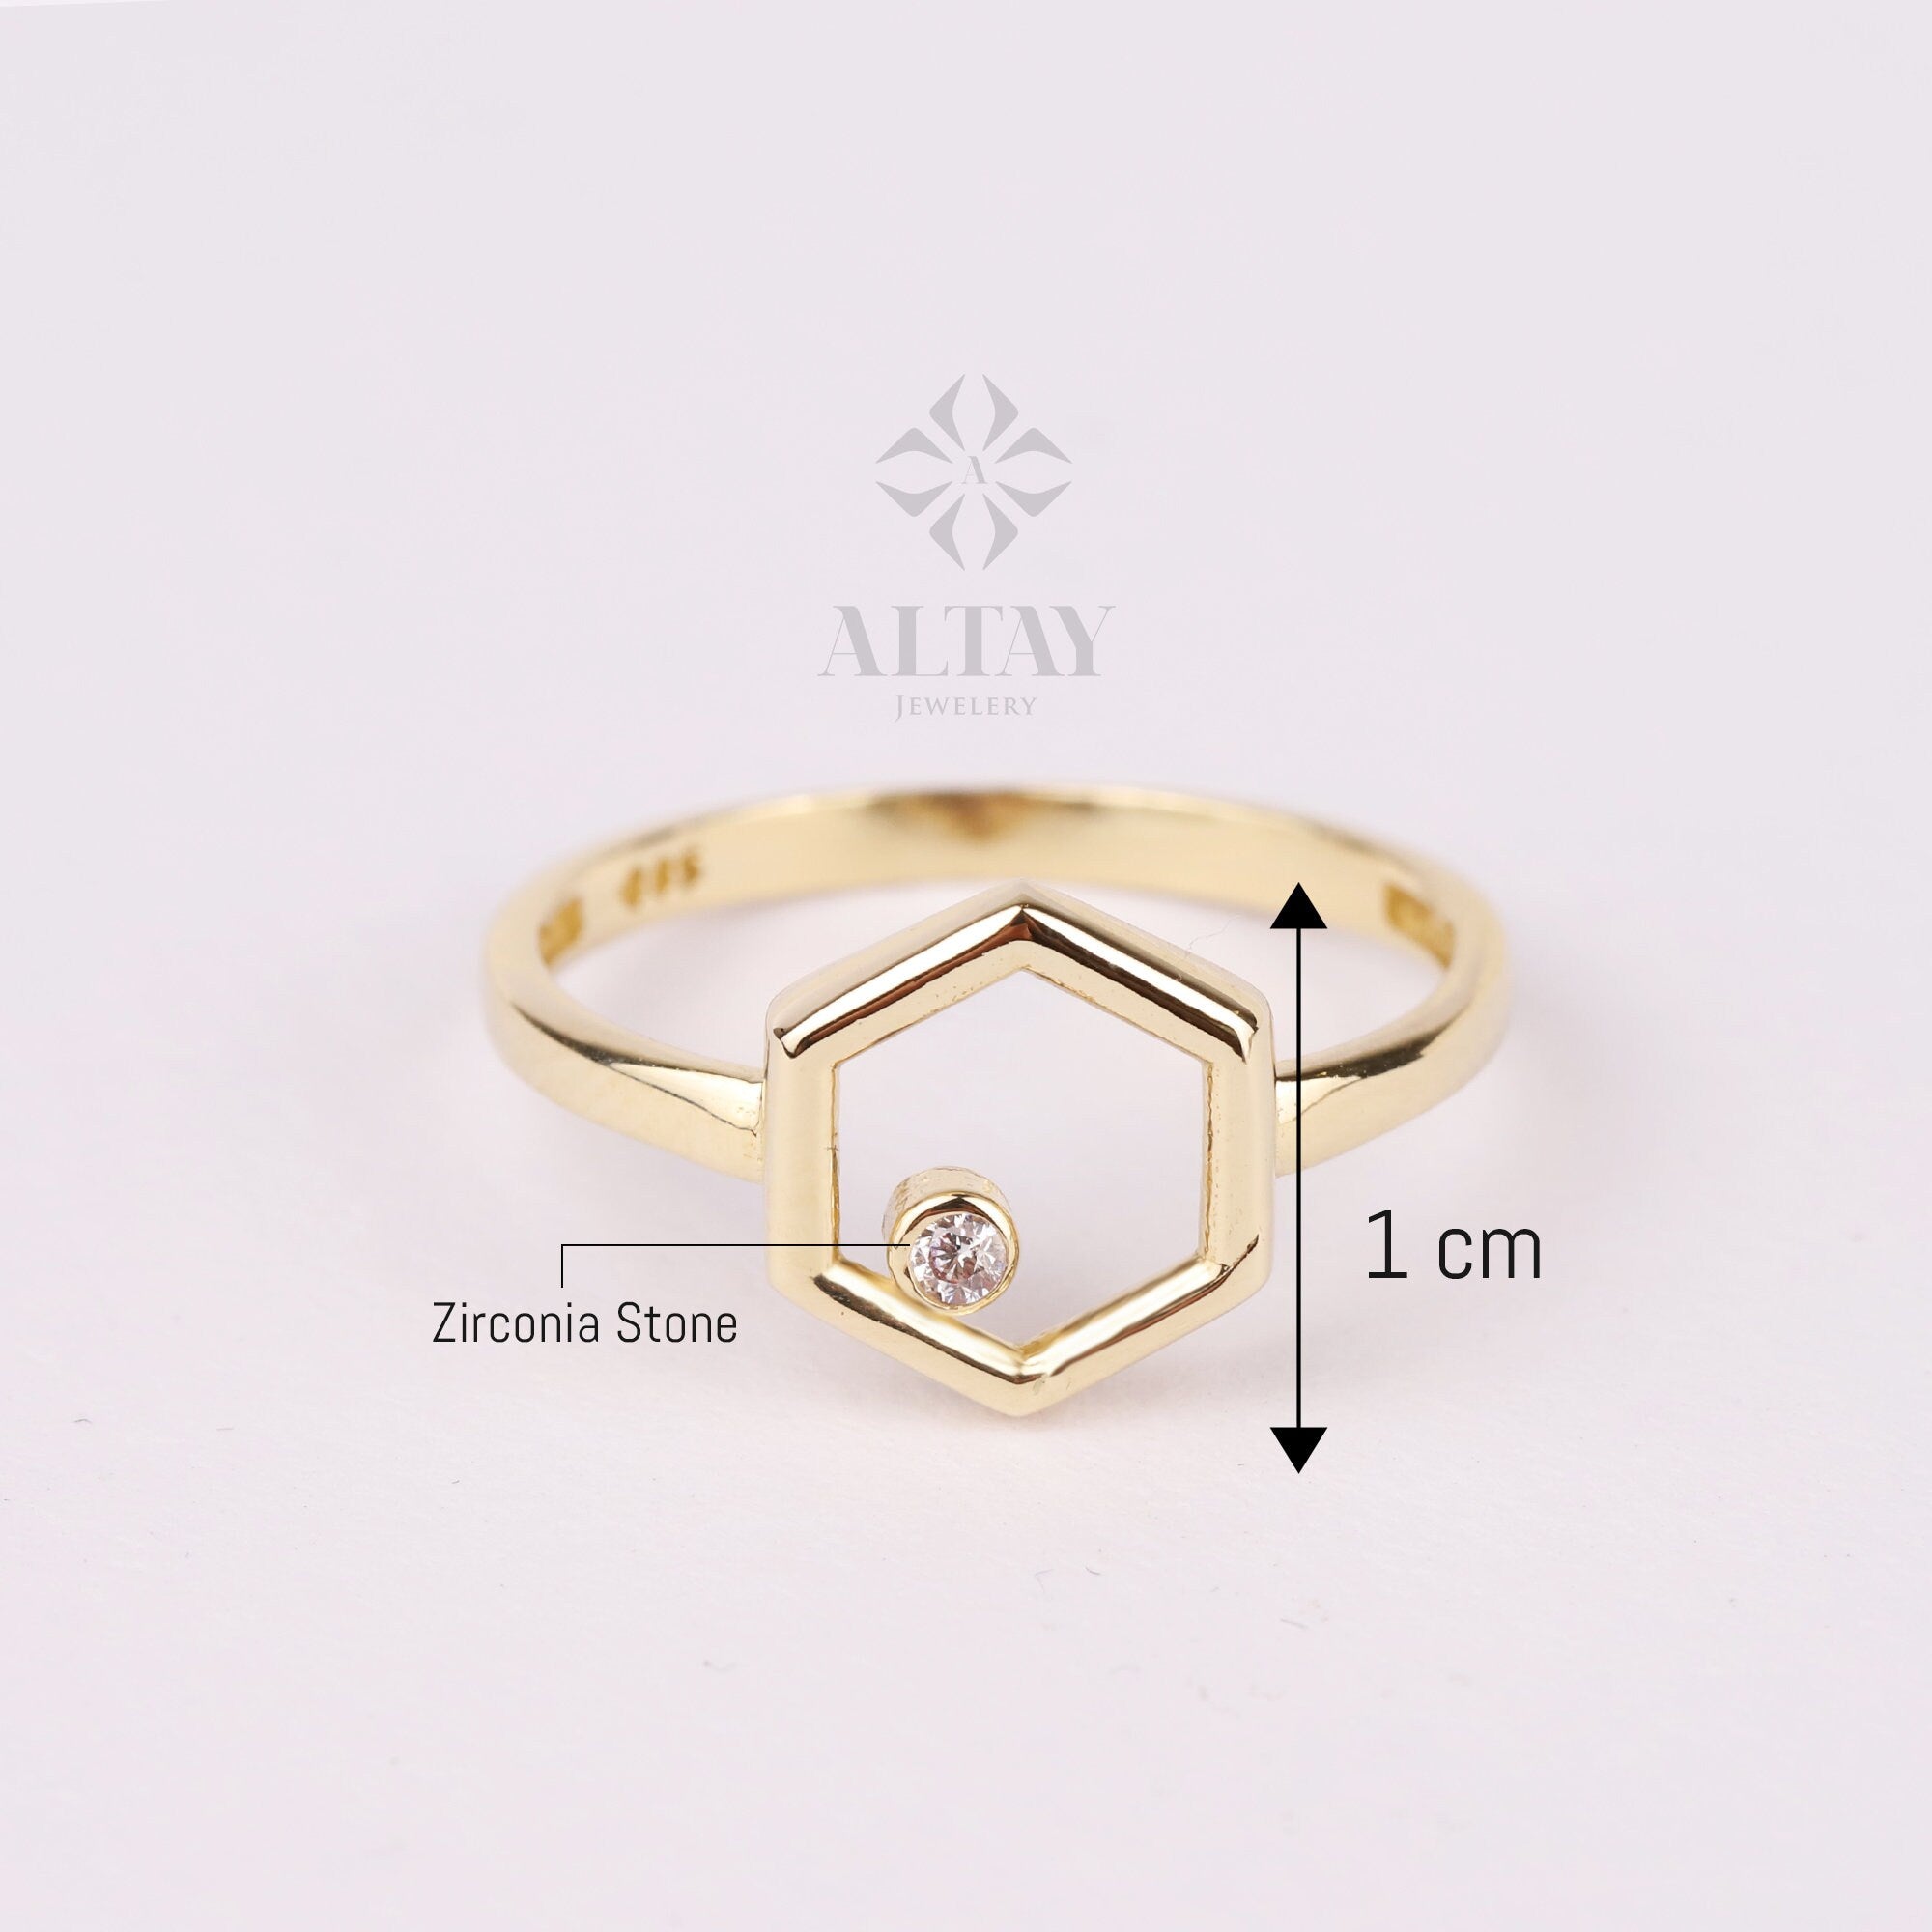 14K Gold Hexagon Ring, Cz Diamond Ring, Geometric Knuckle Ring, Hexagon Stacking Band Ring, Dainty Wedding Ring, Unique Design Gold Ring